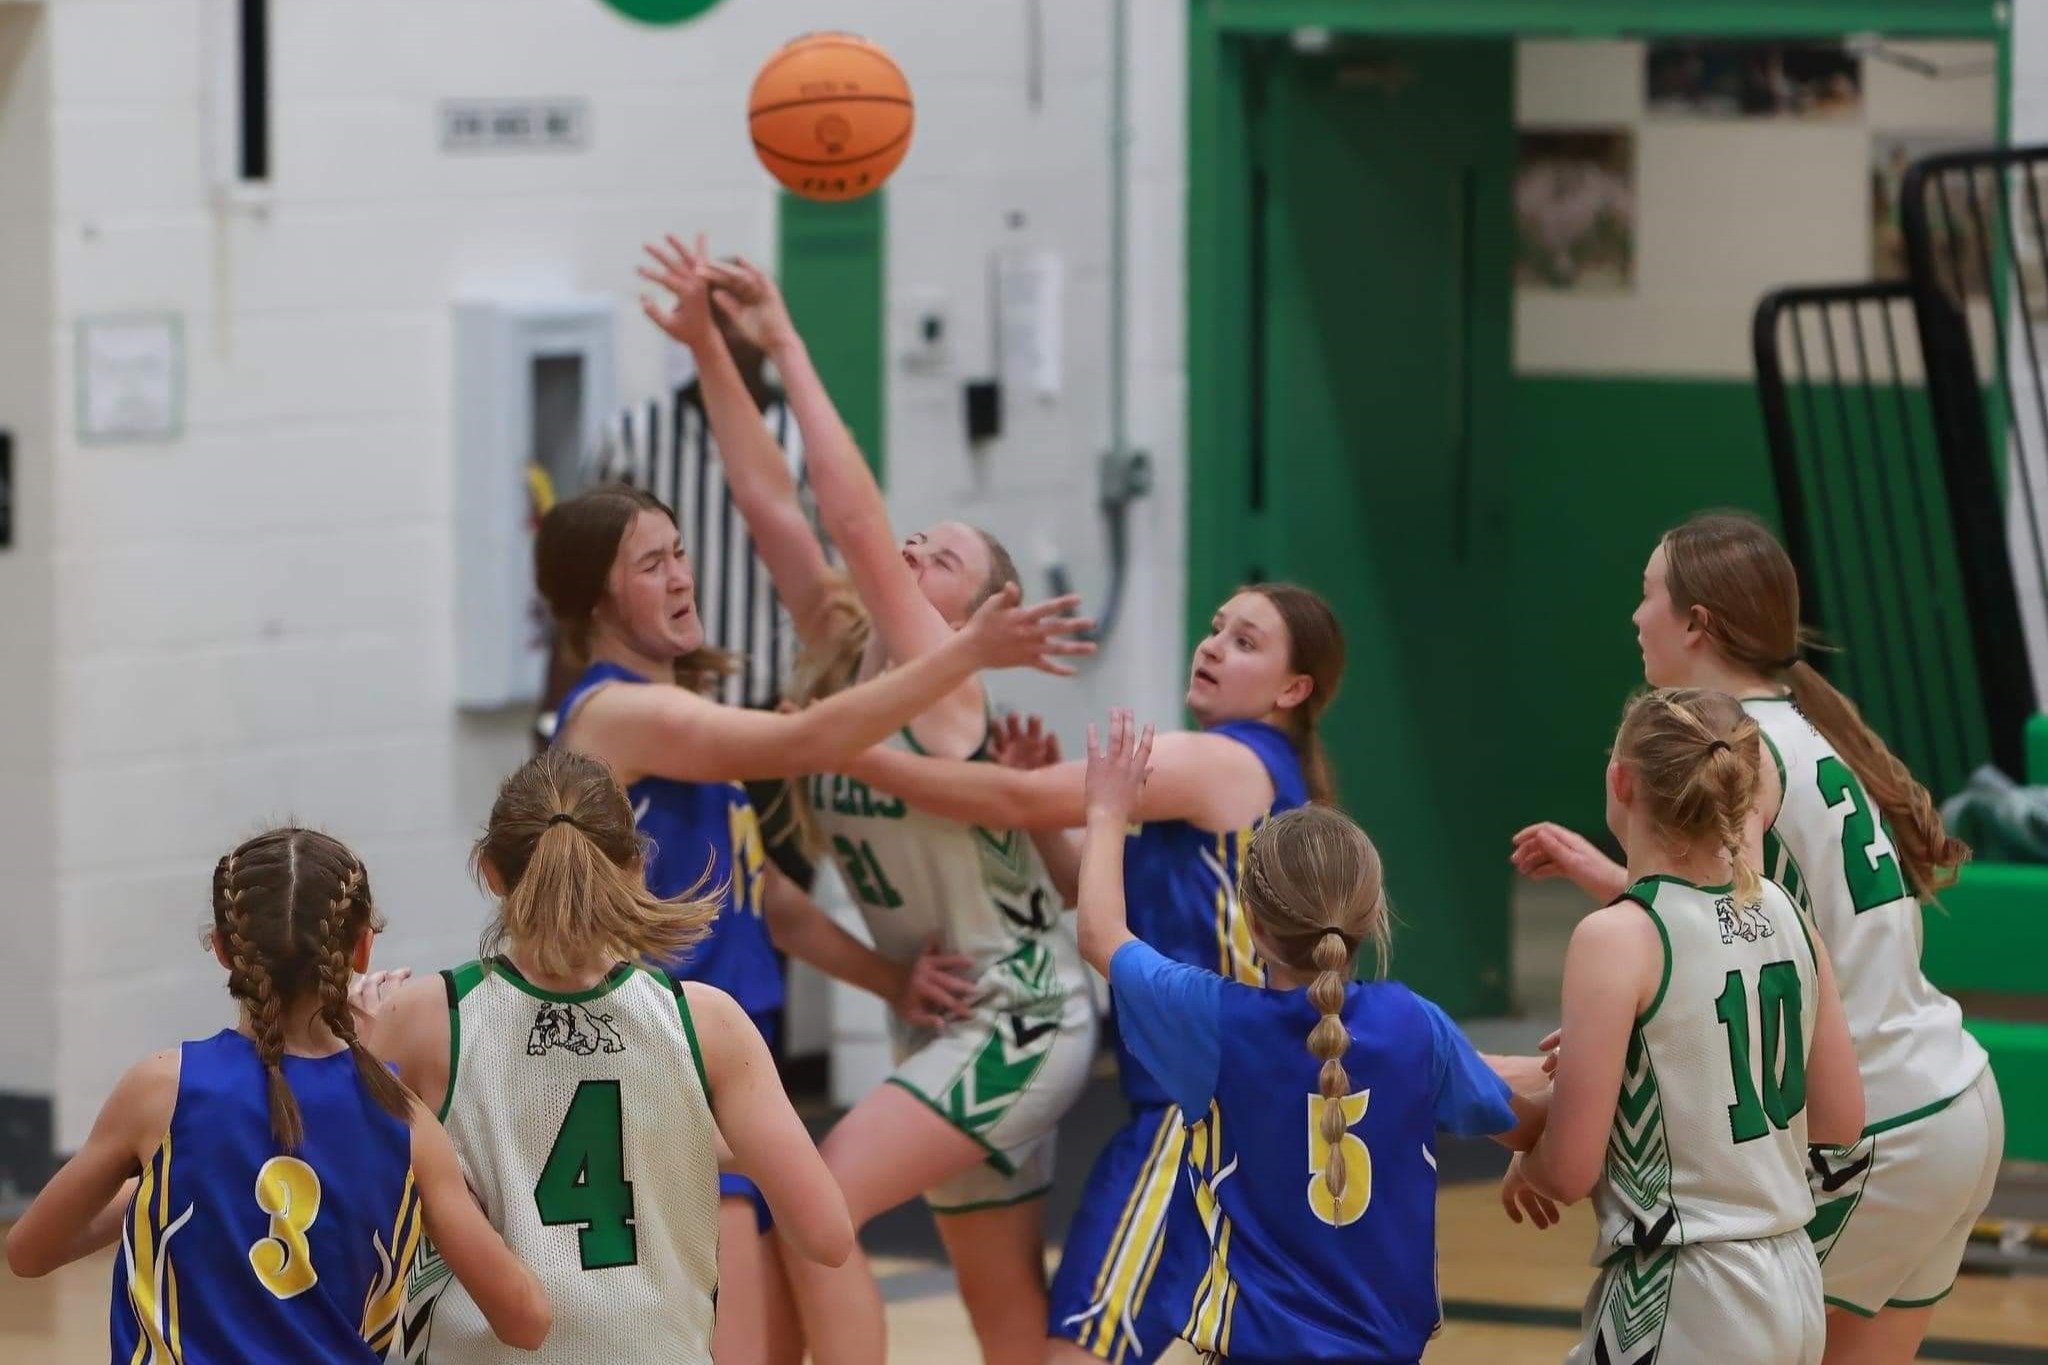 Byers girls vs Simla all gilrs trying to get the ball.